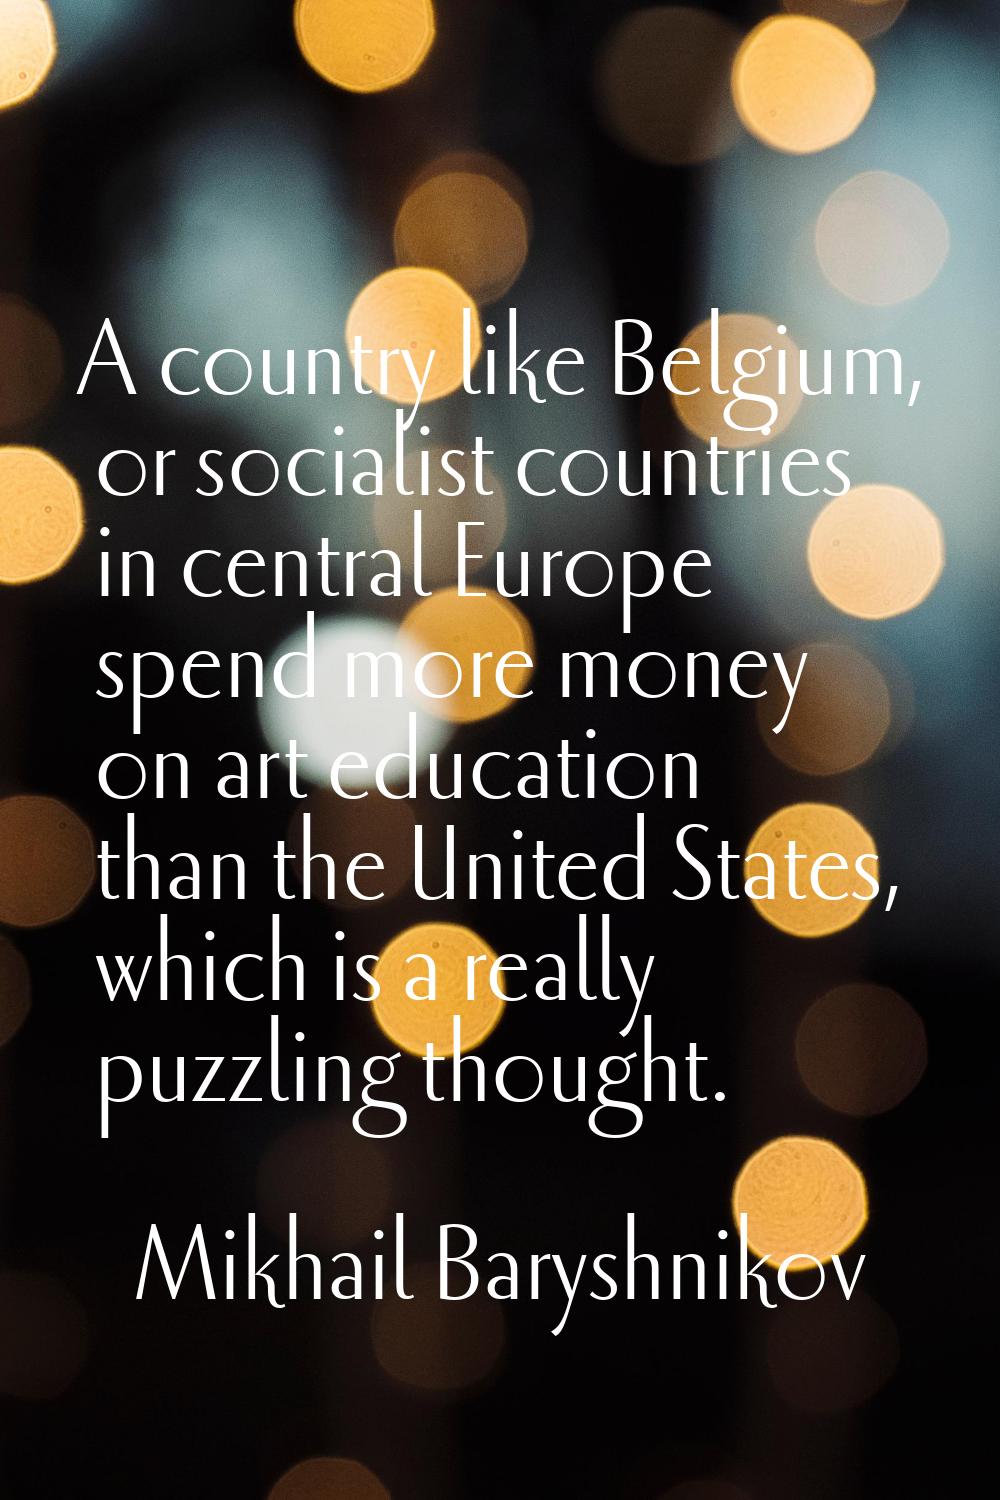 A country like Belgium, or socialist countries in central Europe spend more money on art education 